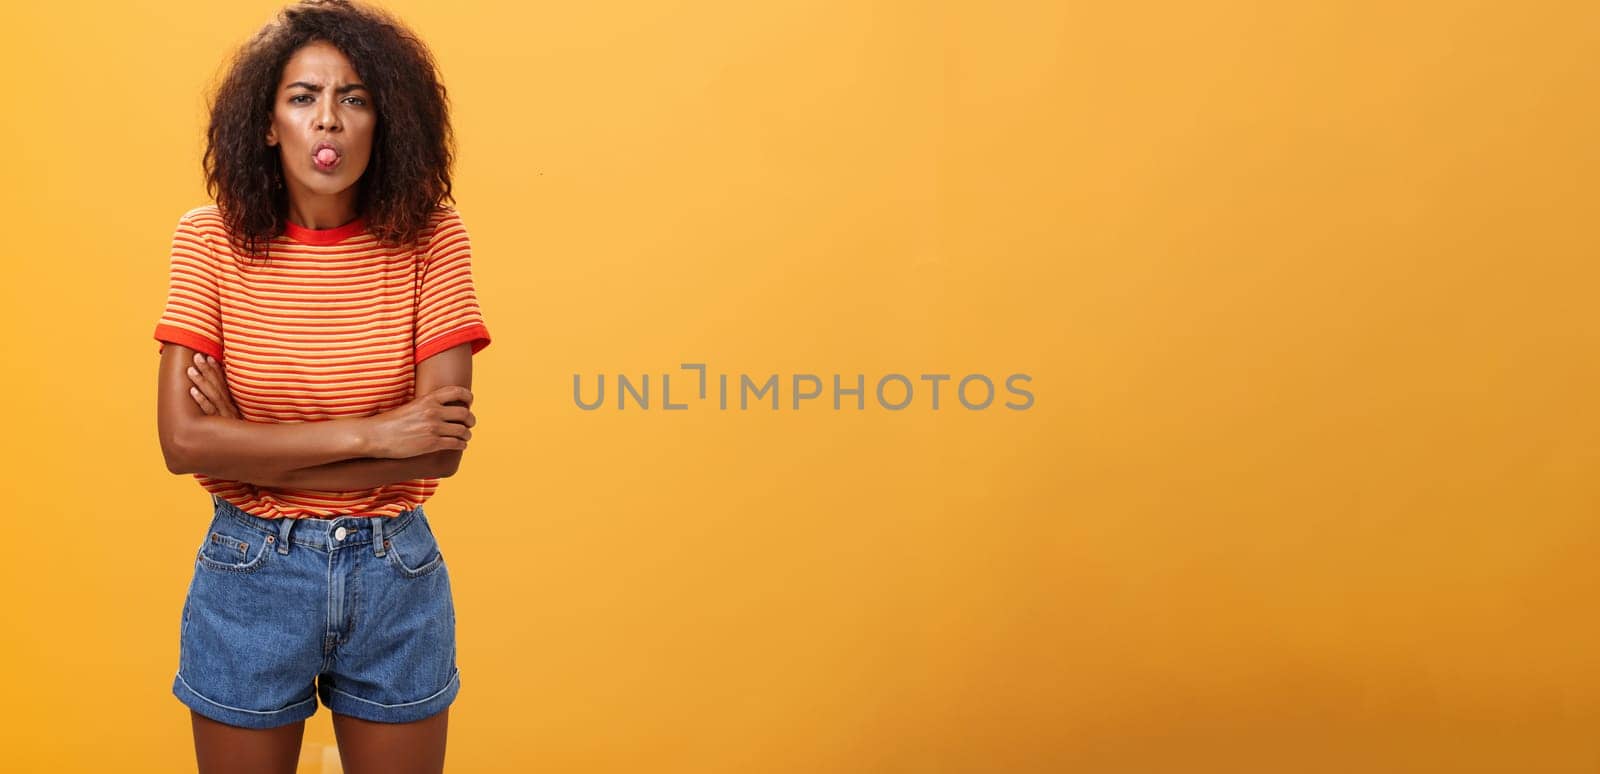 Immature girl showing bad side of character. Portrait of childish offended or displeased young African-American woman with curly hair showing tongue crossing arms on chest over orange background.